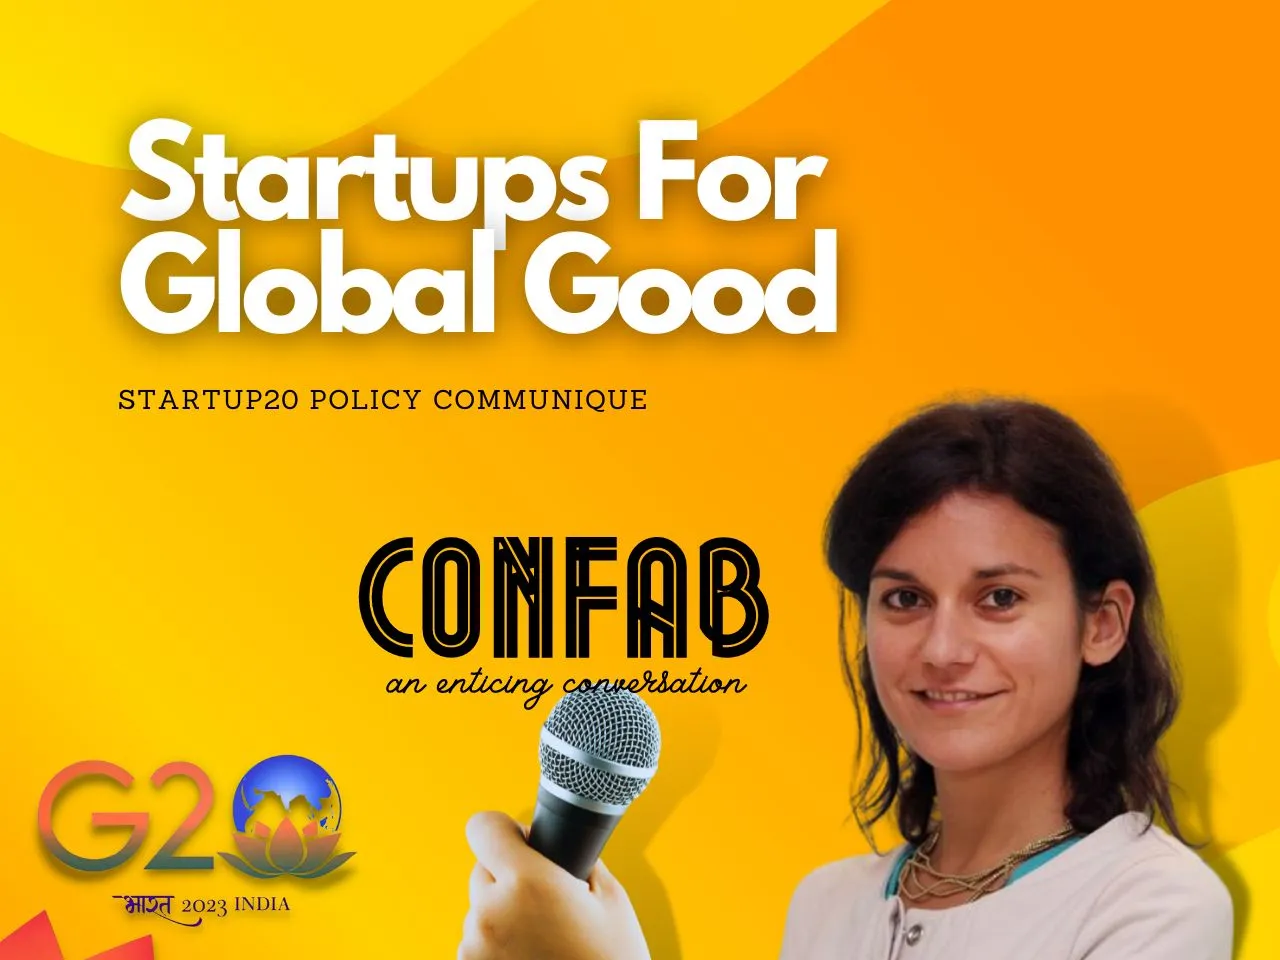 Startup20 Policy Communique - A Game-Changer for Global Startups